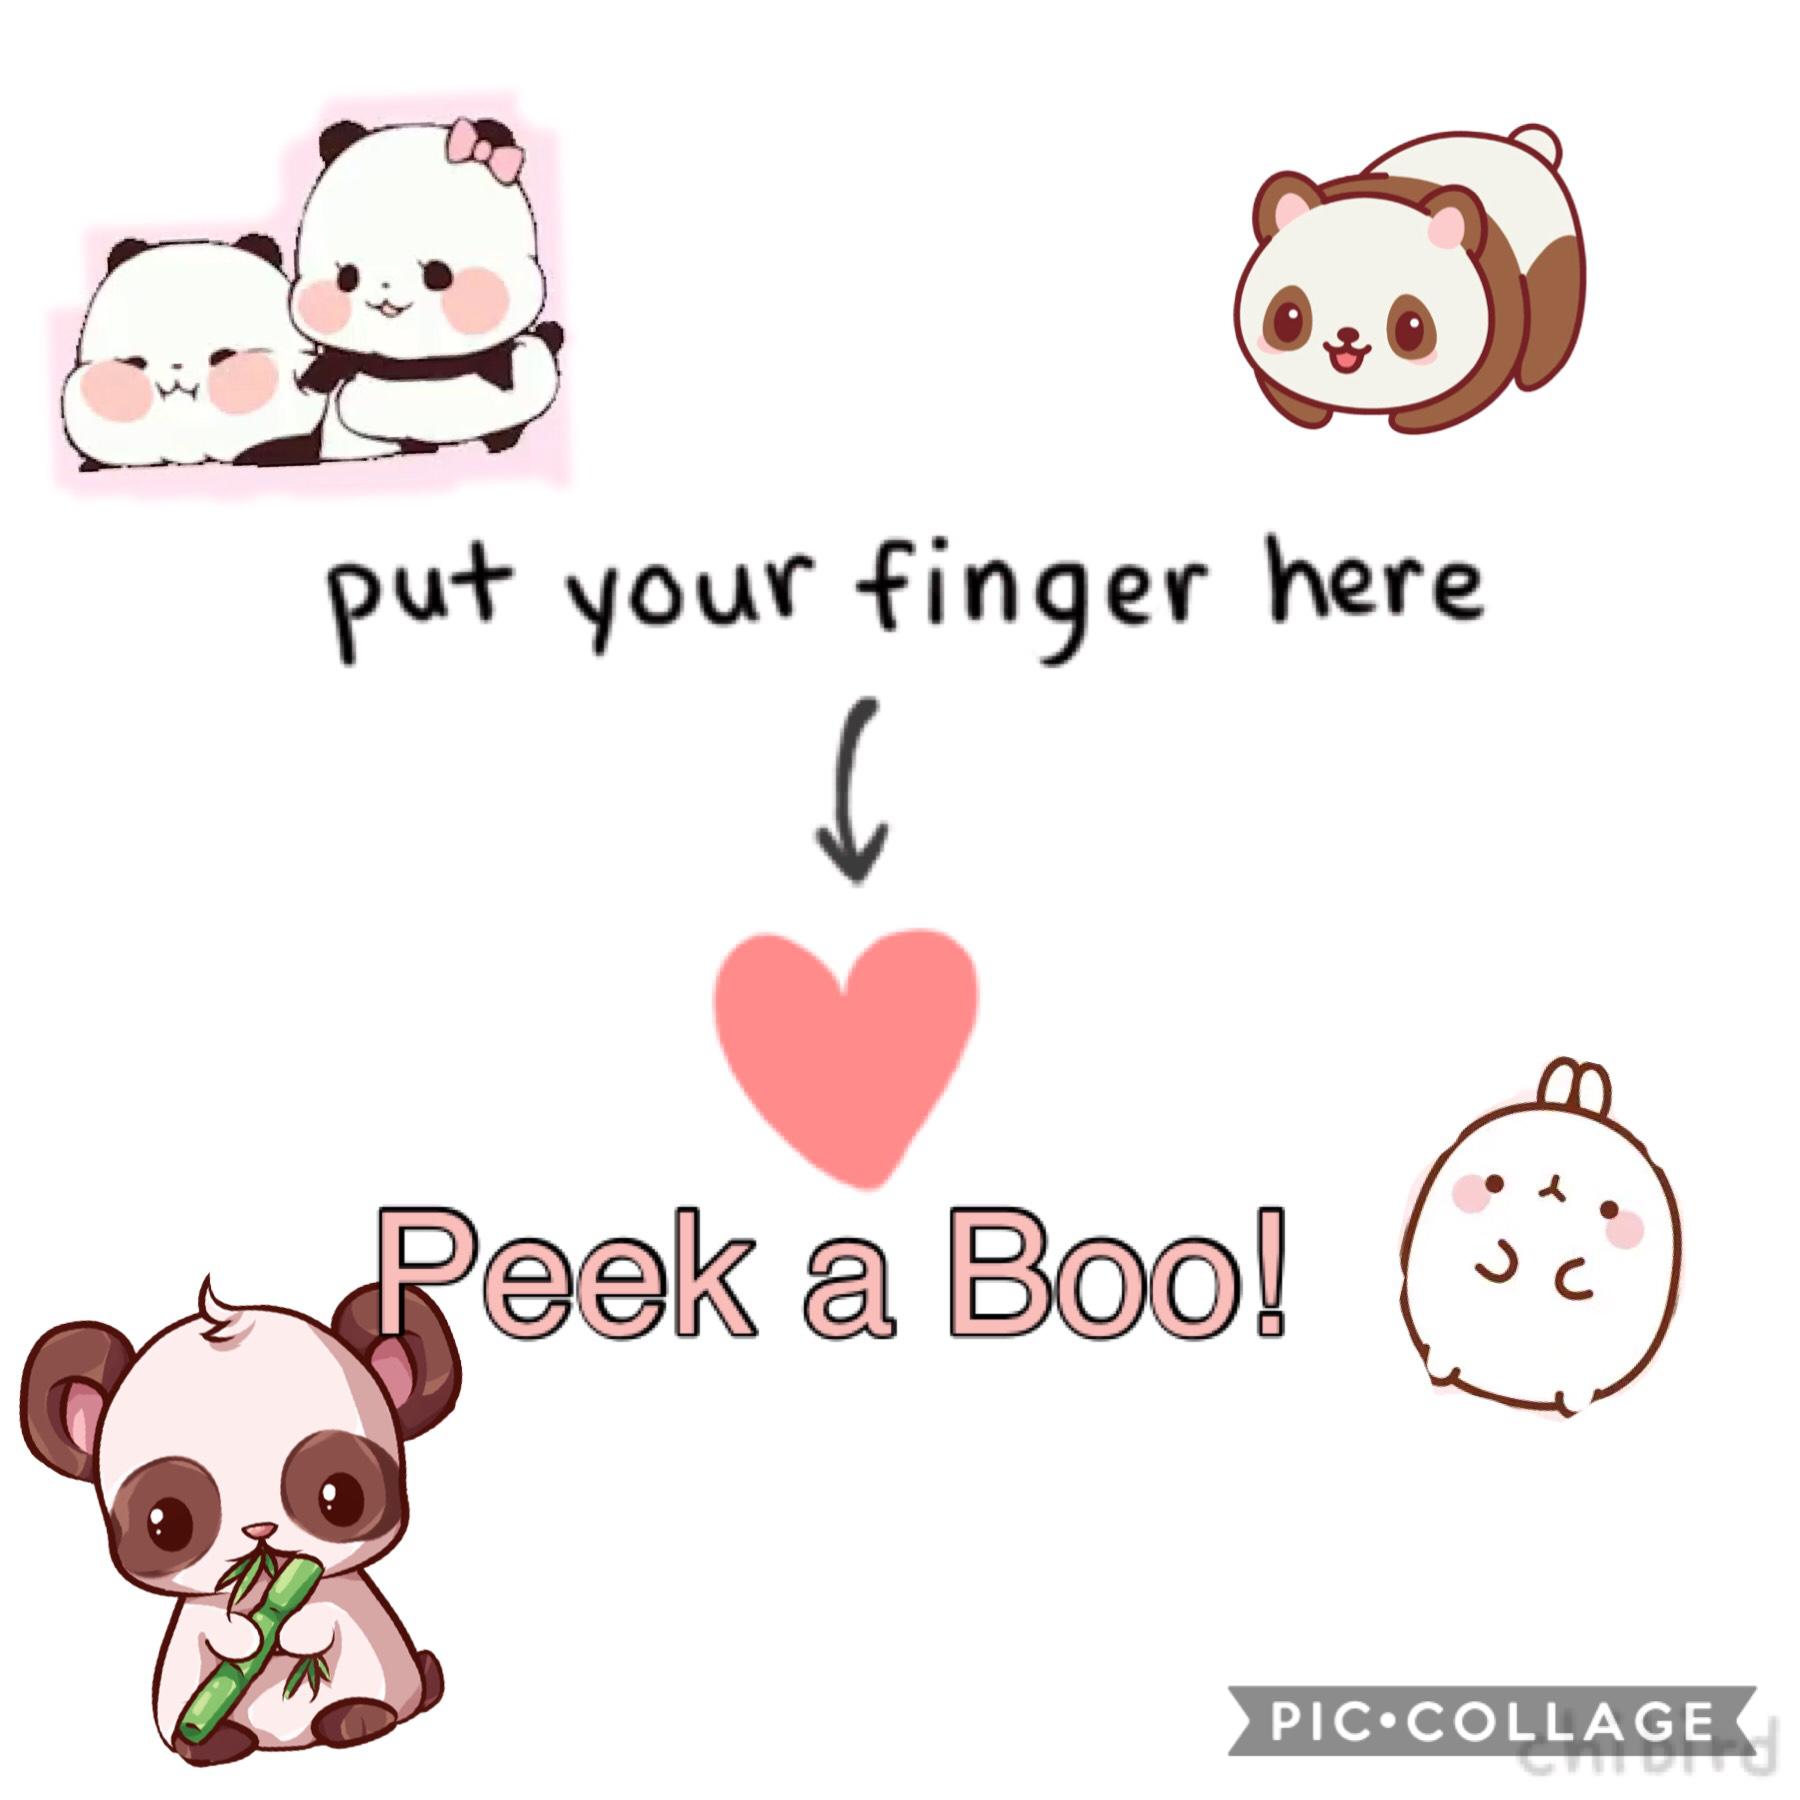 A cute little kawaii GIF with some other friends included! Hope you enjoy! If you have picsart find me as: doopledoop. If u have FancyKey, find me as: doopledoop. Hope you enjoy ❤️